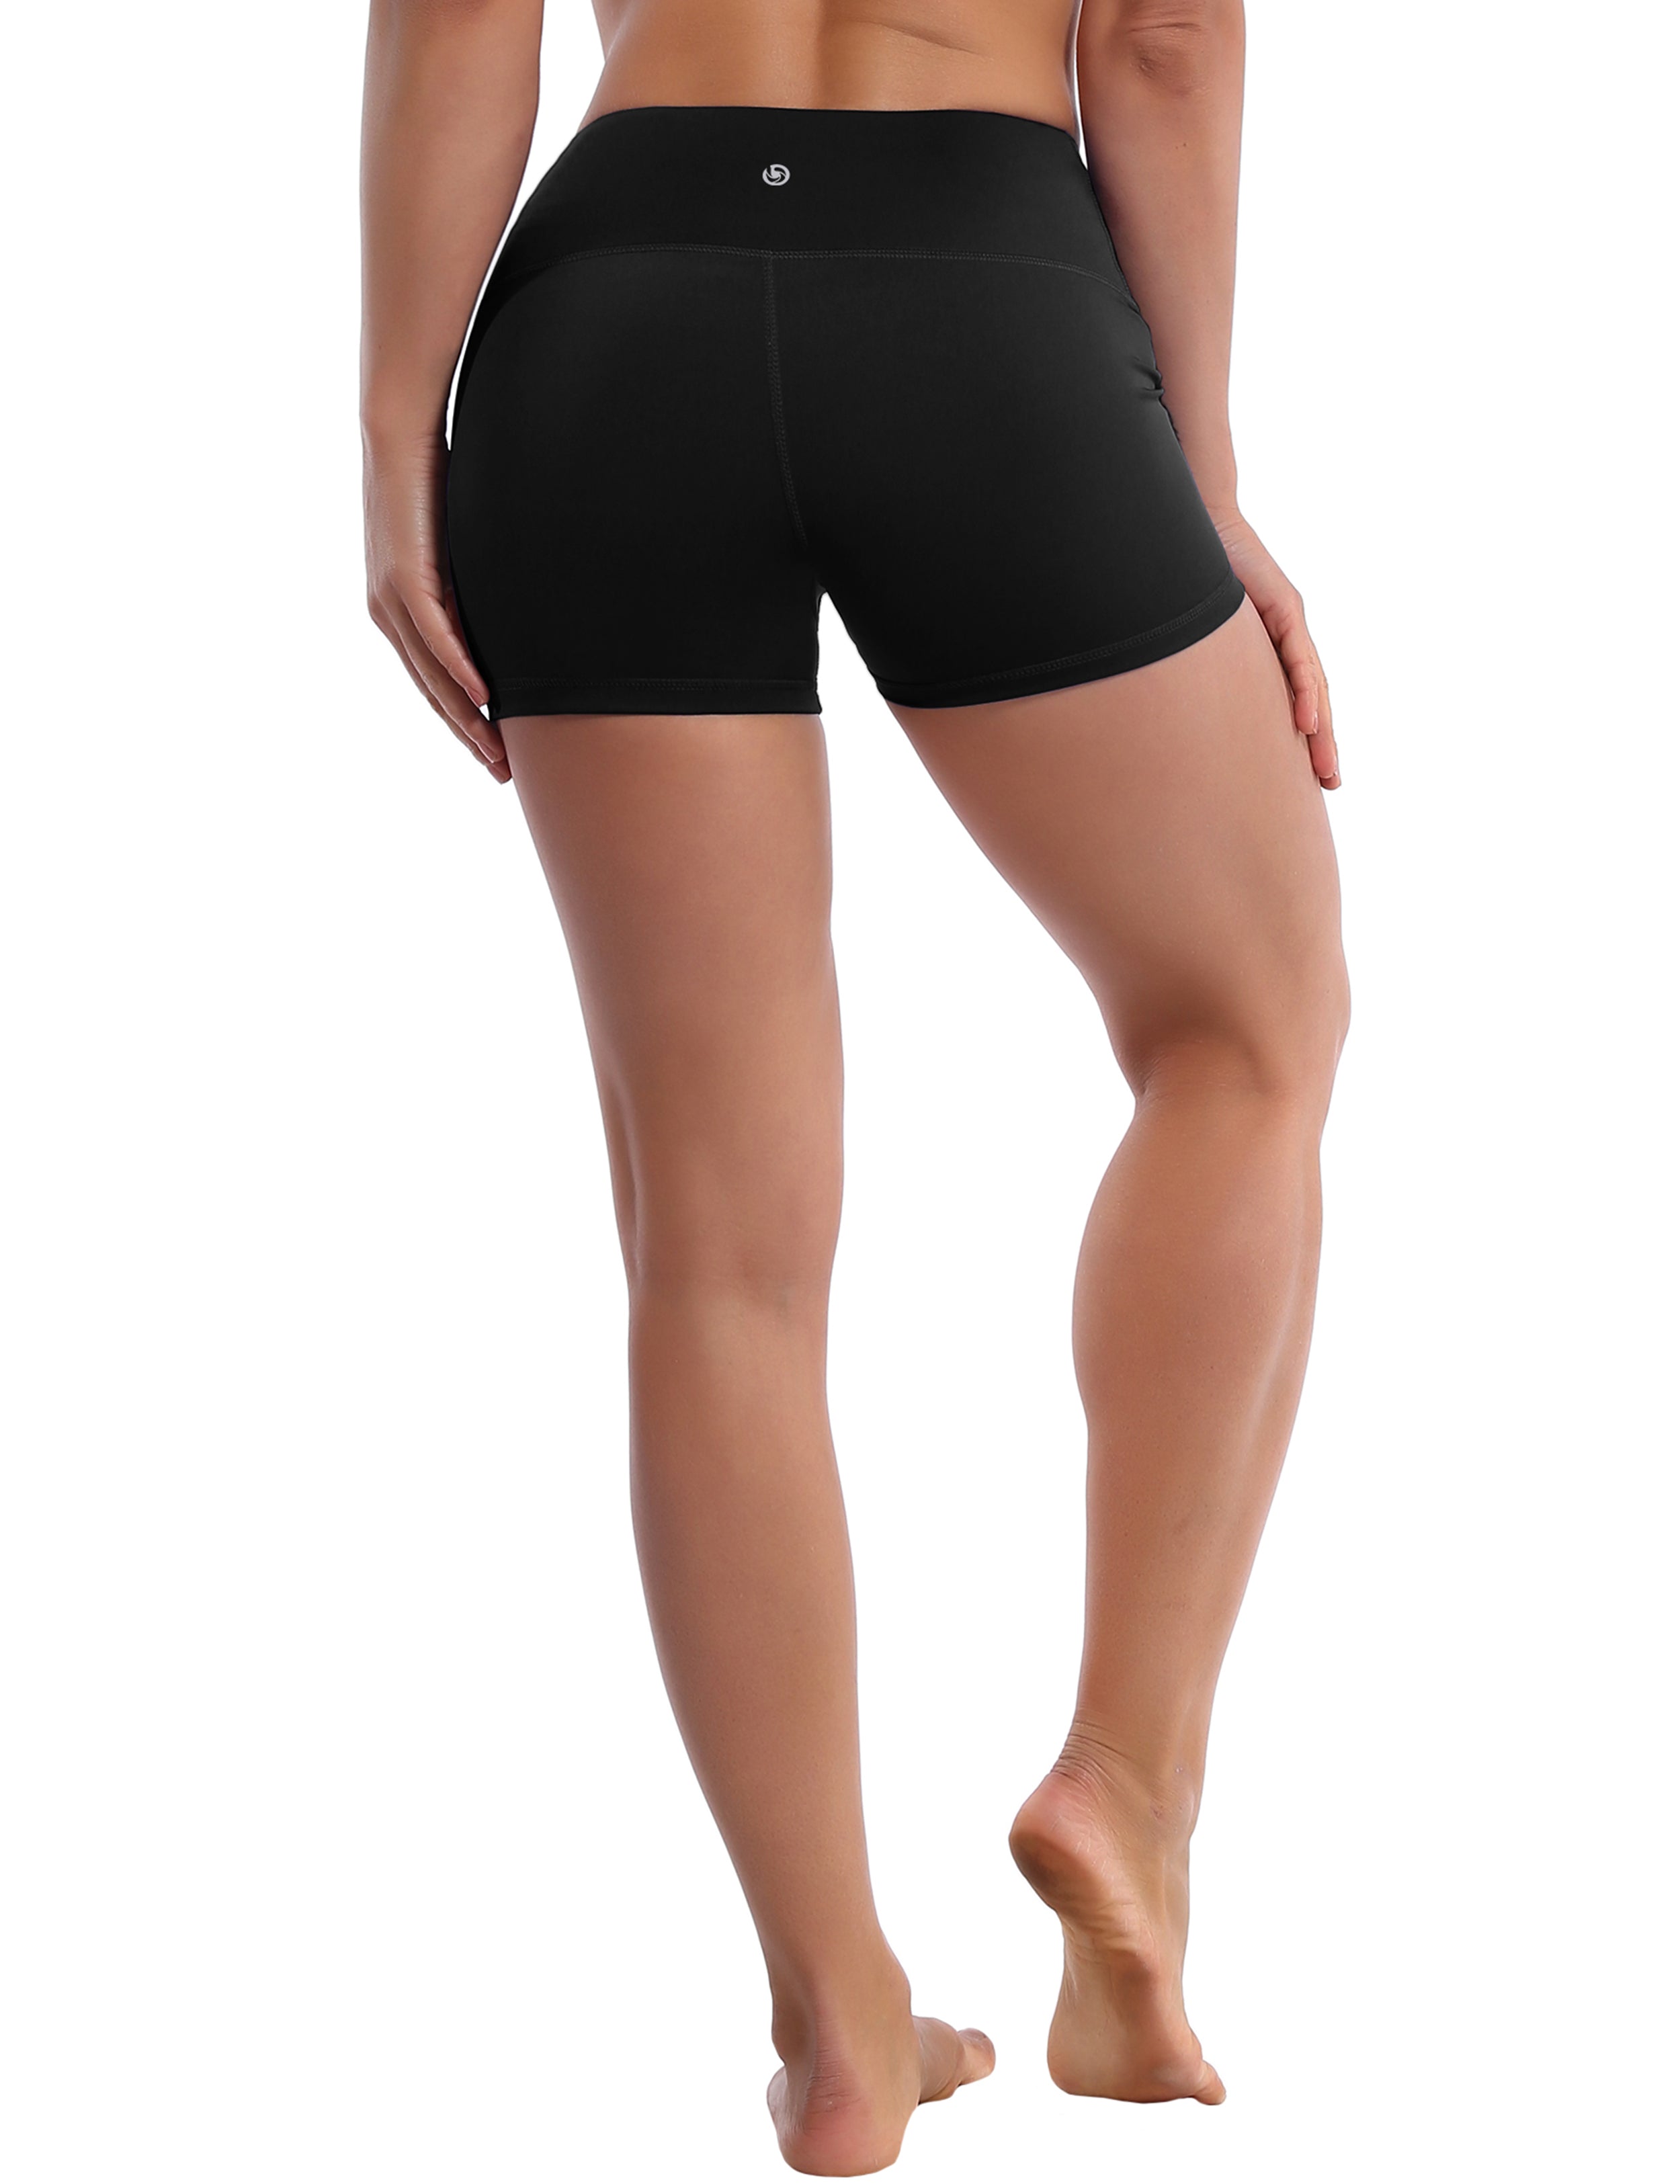 2.5" Yoga Shorts black Softest-ever fabric High elasticity High density 4-way stretch Fabric doesn't attract lint easily No see-through Moisture-wicking Machine wash 75% Nylon, 25% Spandex